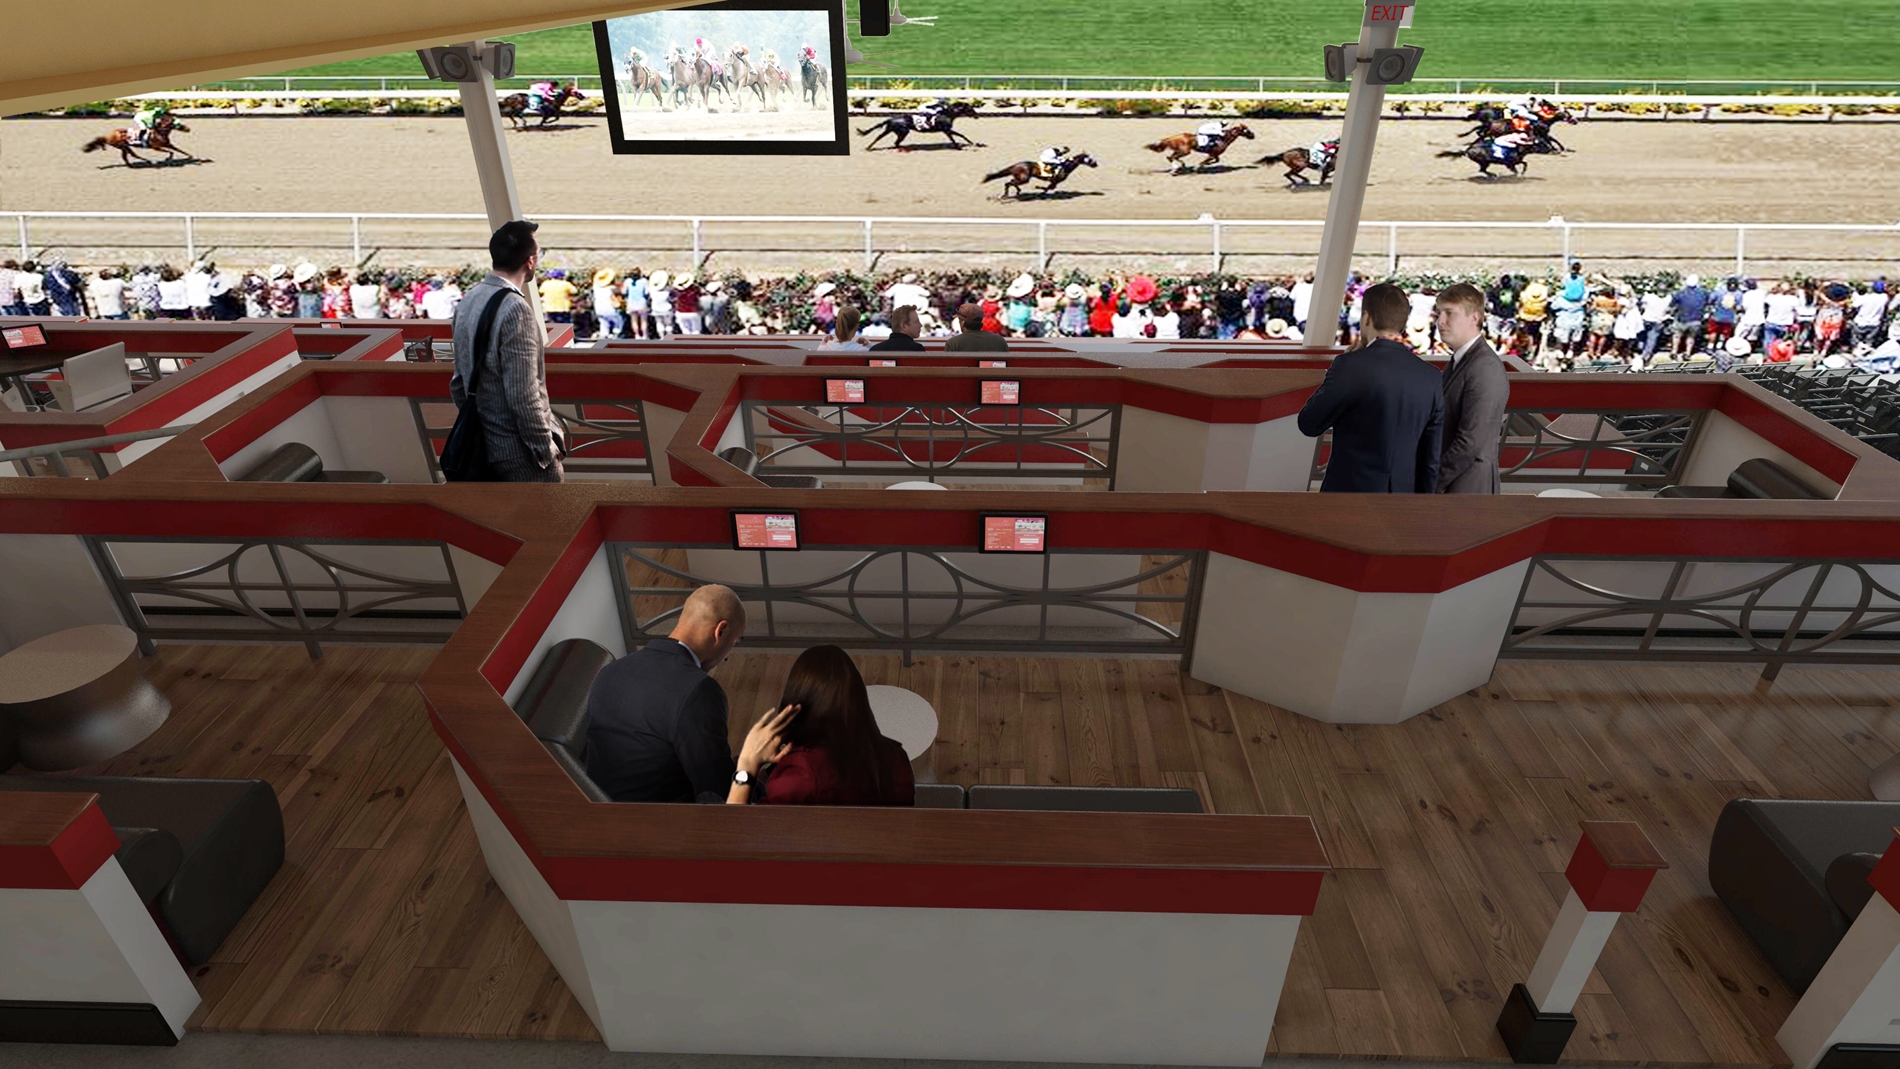 Saratoga Race Course Grandstand Seating Chart